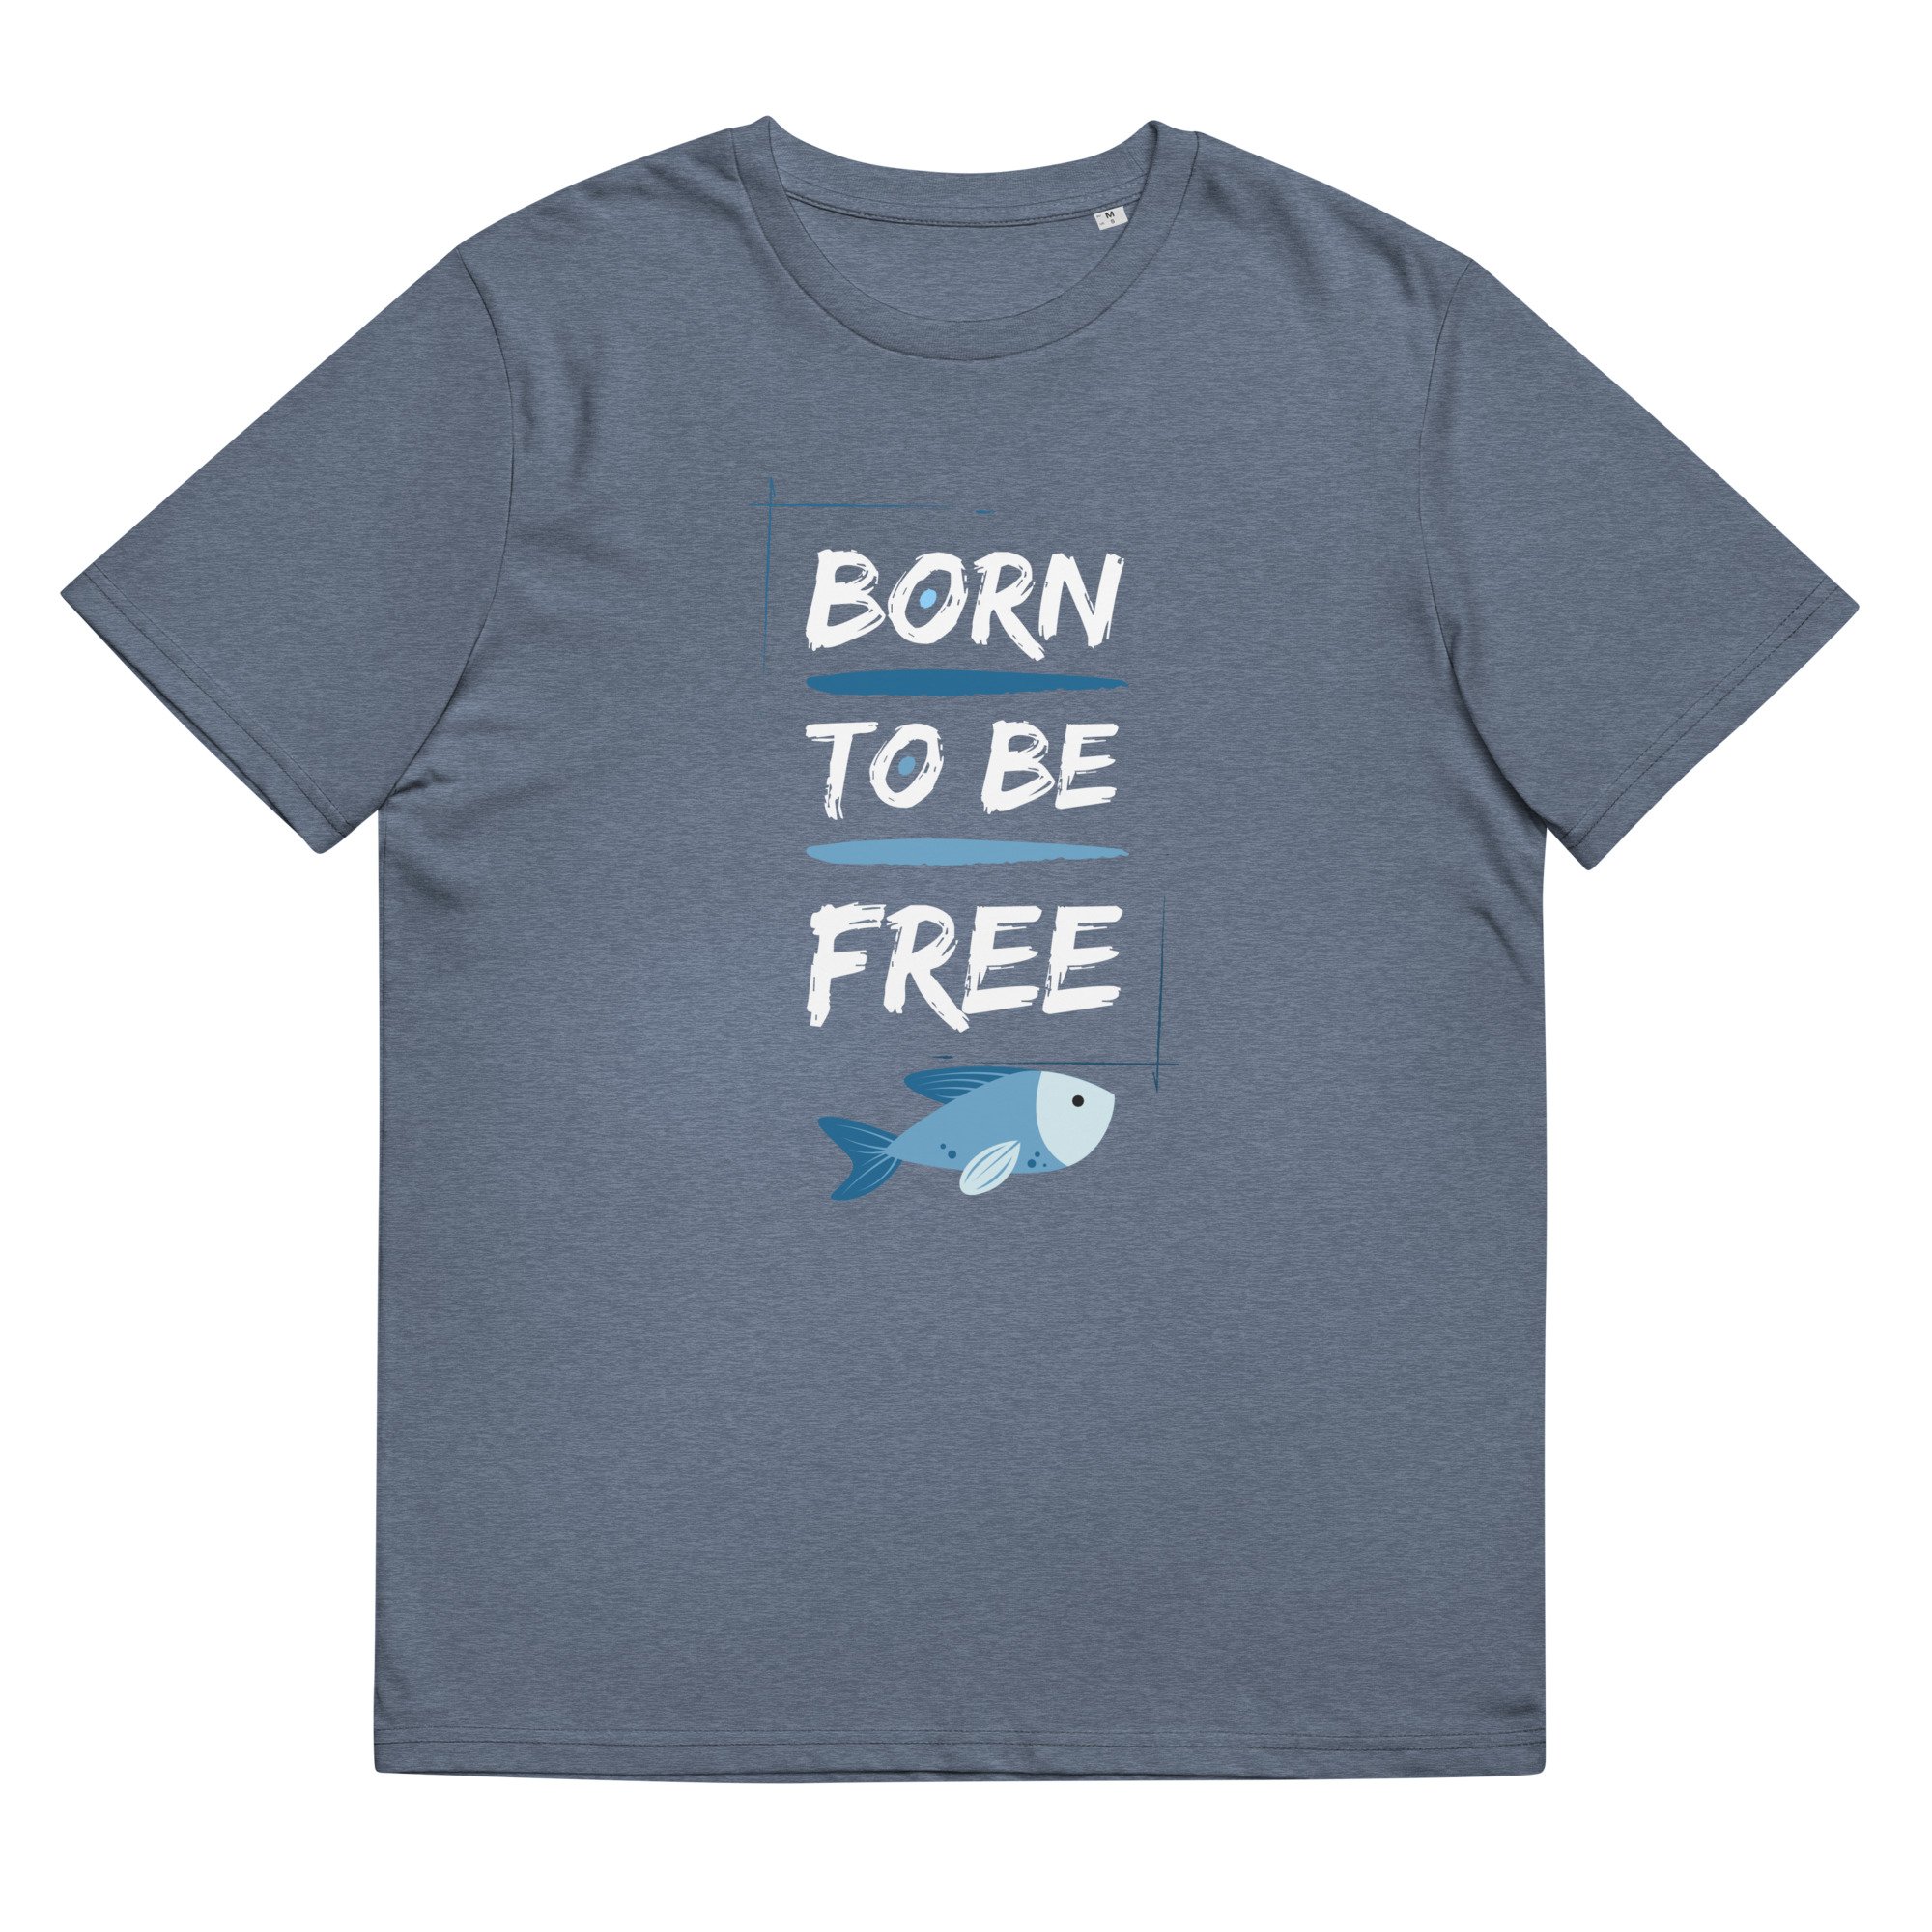 Born to be free' t-shirt